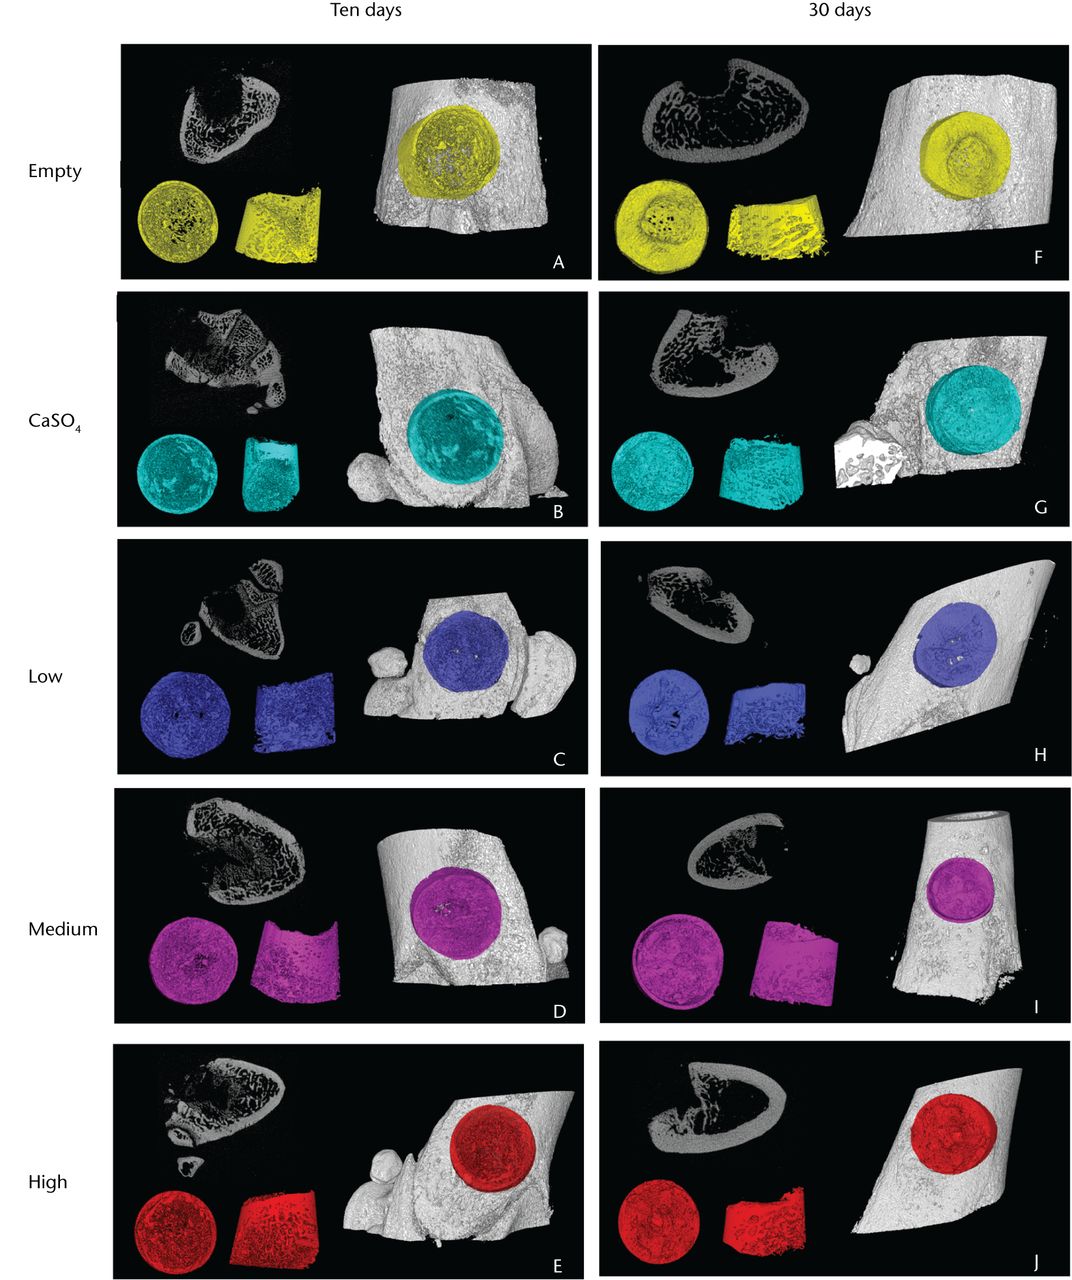 Fig. 4 
            Representative three-dimensional micro-CT
reconstructions of the femoral defect sites, with the ten-day samples
in the left column and the 30-day samples in the right. Within each panel
are (top left) a two-dimensional slice of the defect, (bottom left)
the analysed volume shown from top-down and side views, and (right)
the highlighted defect within the femur.
          